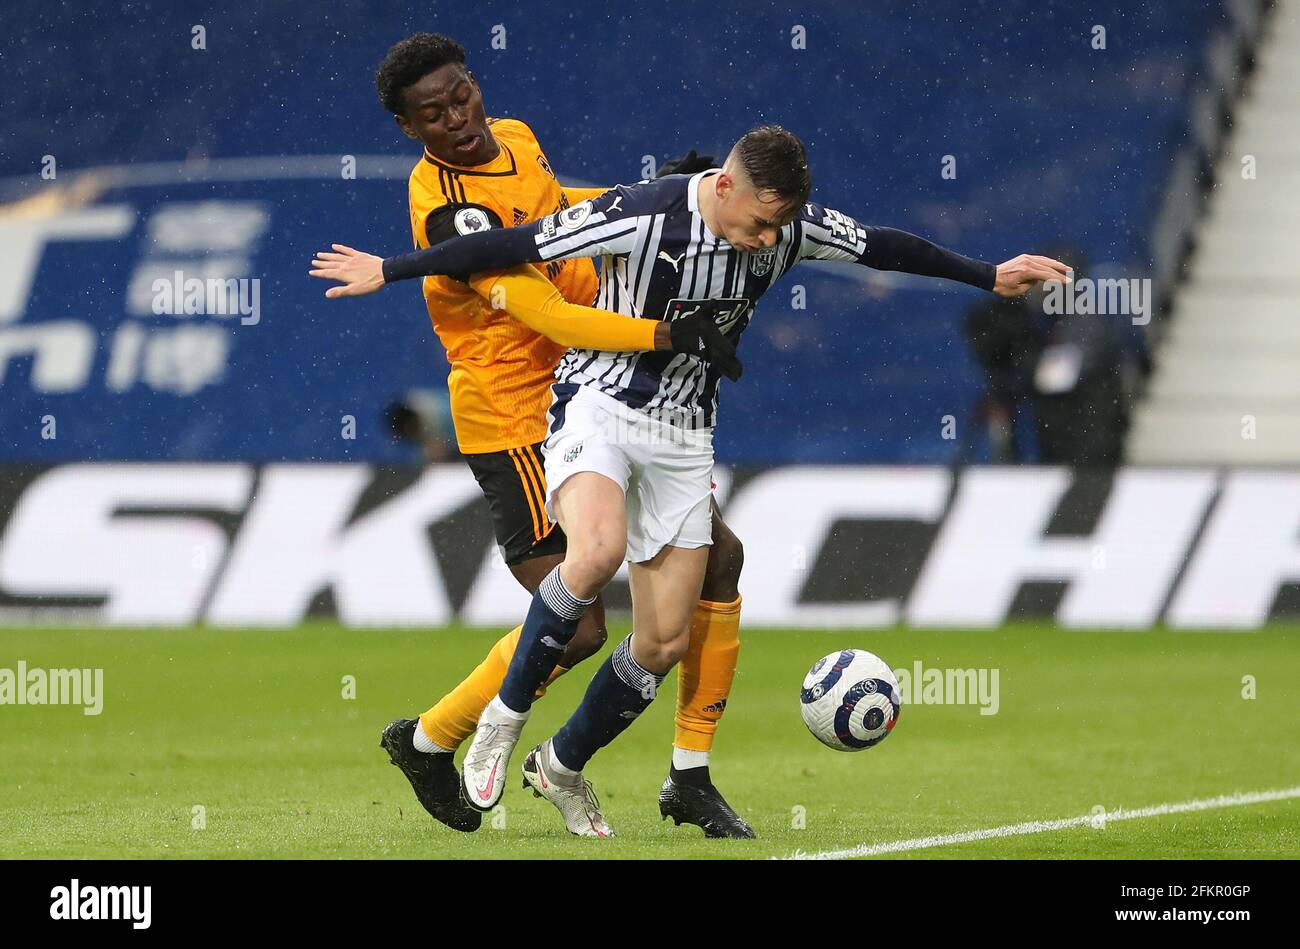 Wolverhampton Wanderers' Owen Otasowie (left) and West Bromwich Albion's Conor Townsend battle for the ball during the Premier League match at The Hawthorns, West Bromwich. Issue date: Monday May 3, 2021. Stock Photo